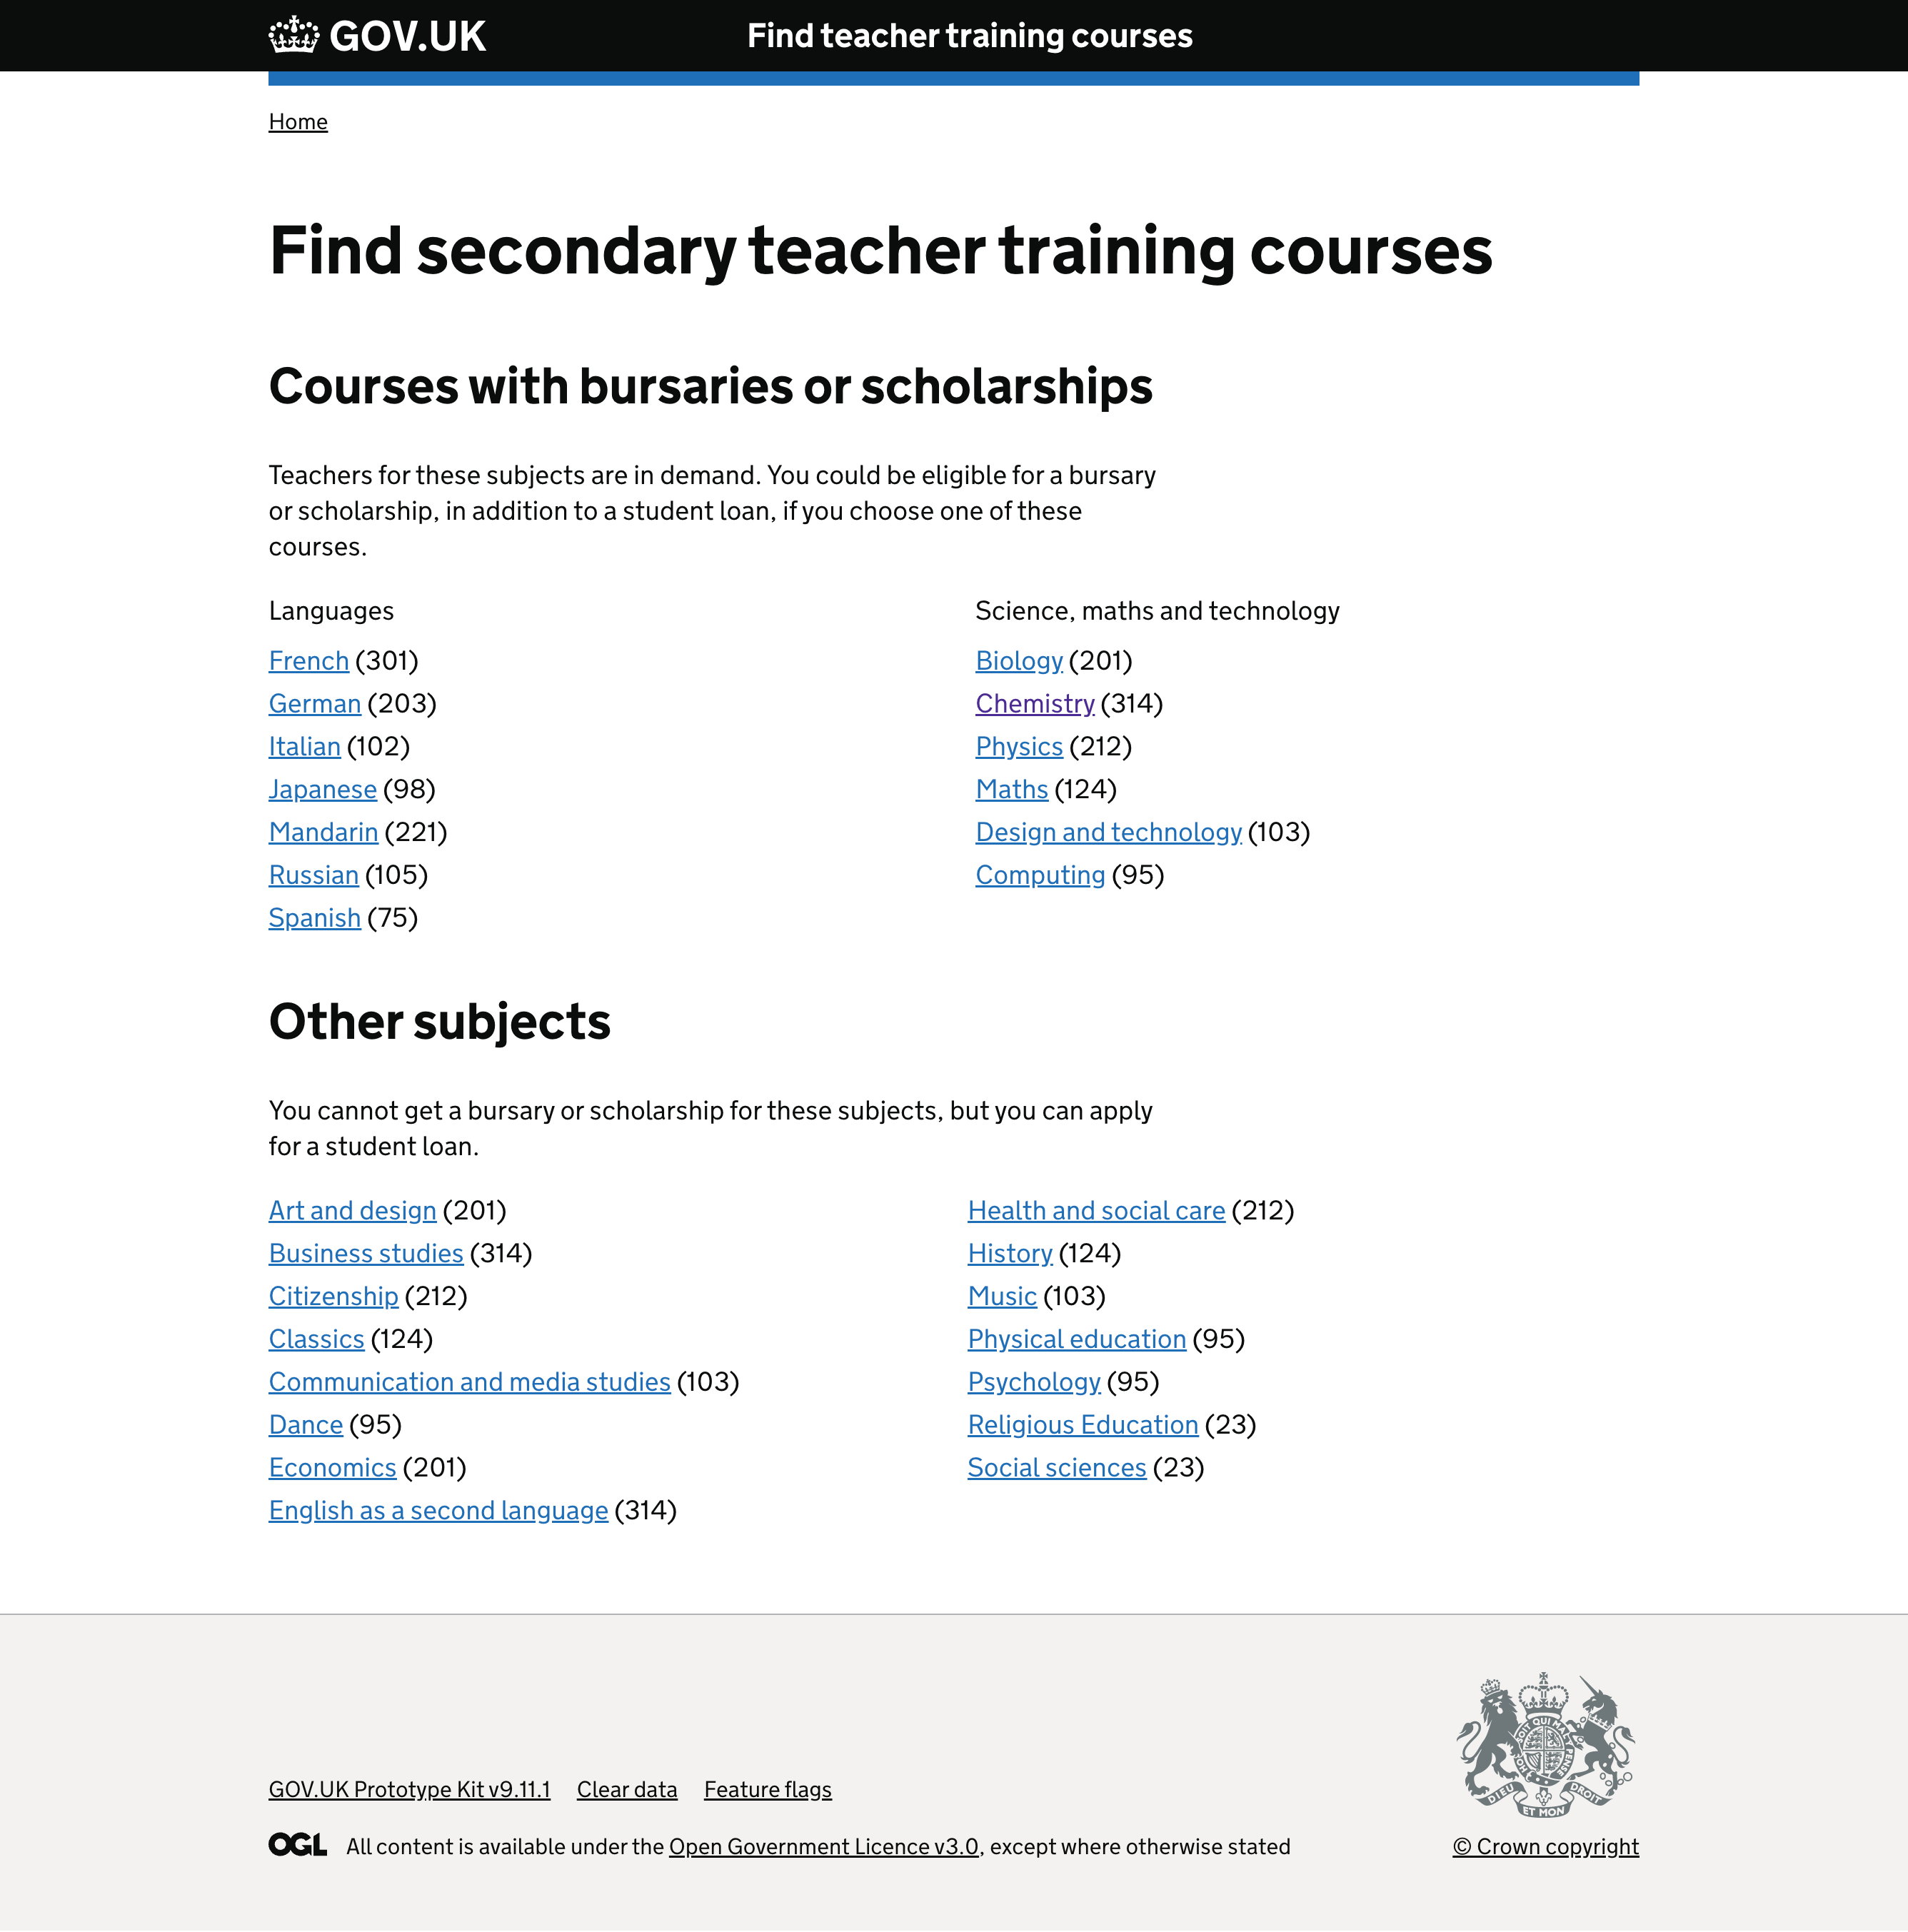 Screenshot showing page titled 'Find secondary teacher training courses' with a list of subjects